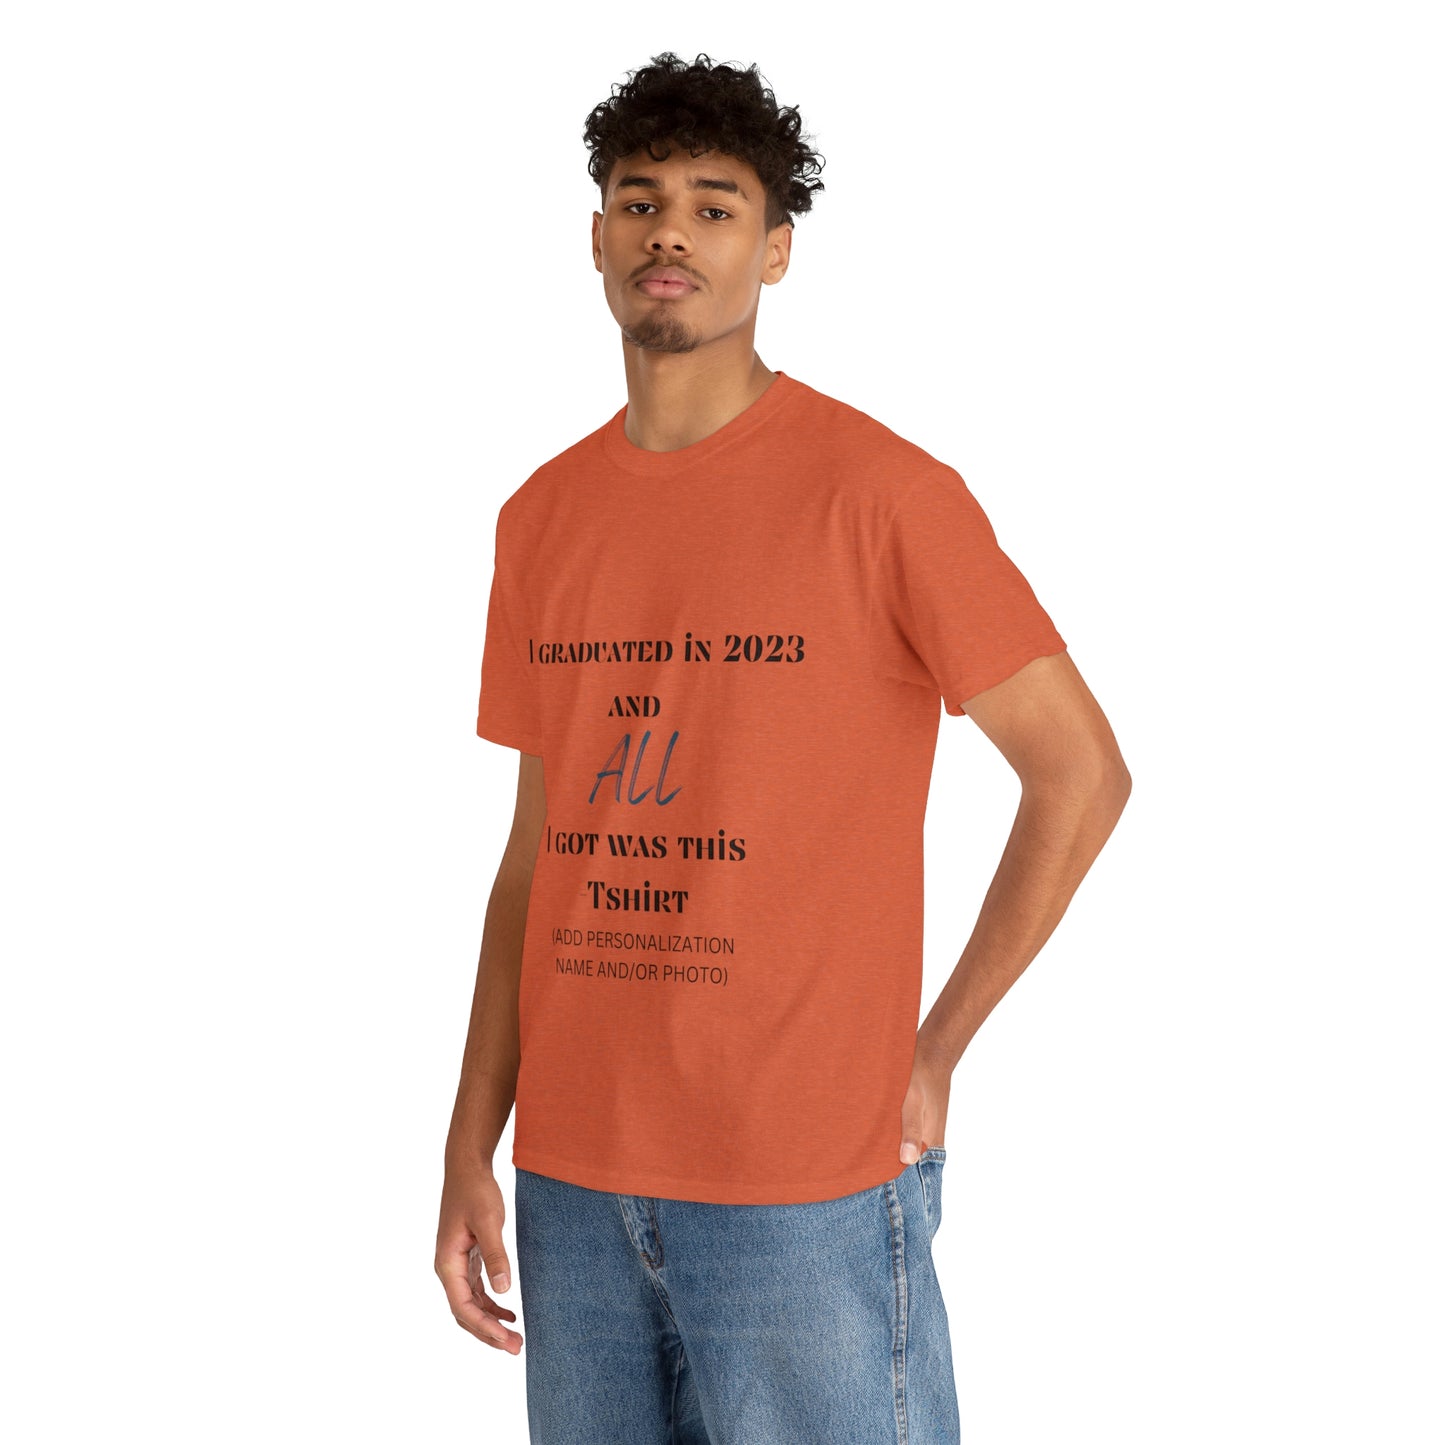 I Graduated and All I Got Was This T-shirt 2023 Graduation T-shirt (PERSONALIZED)